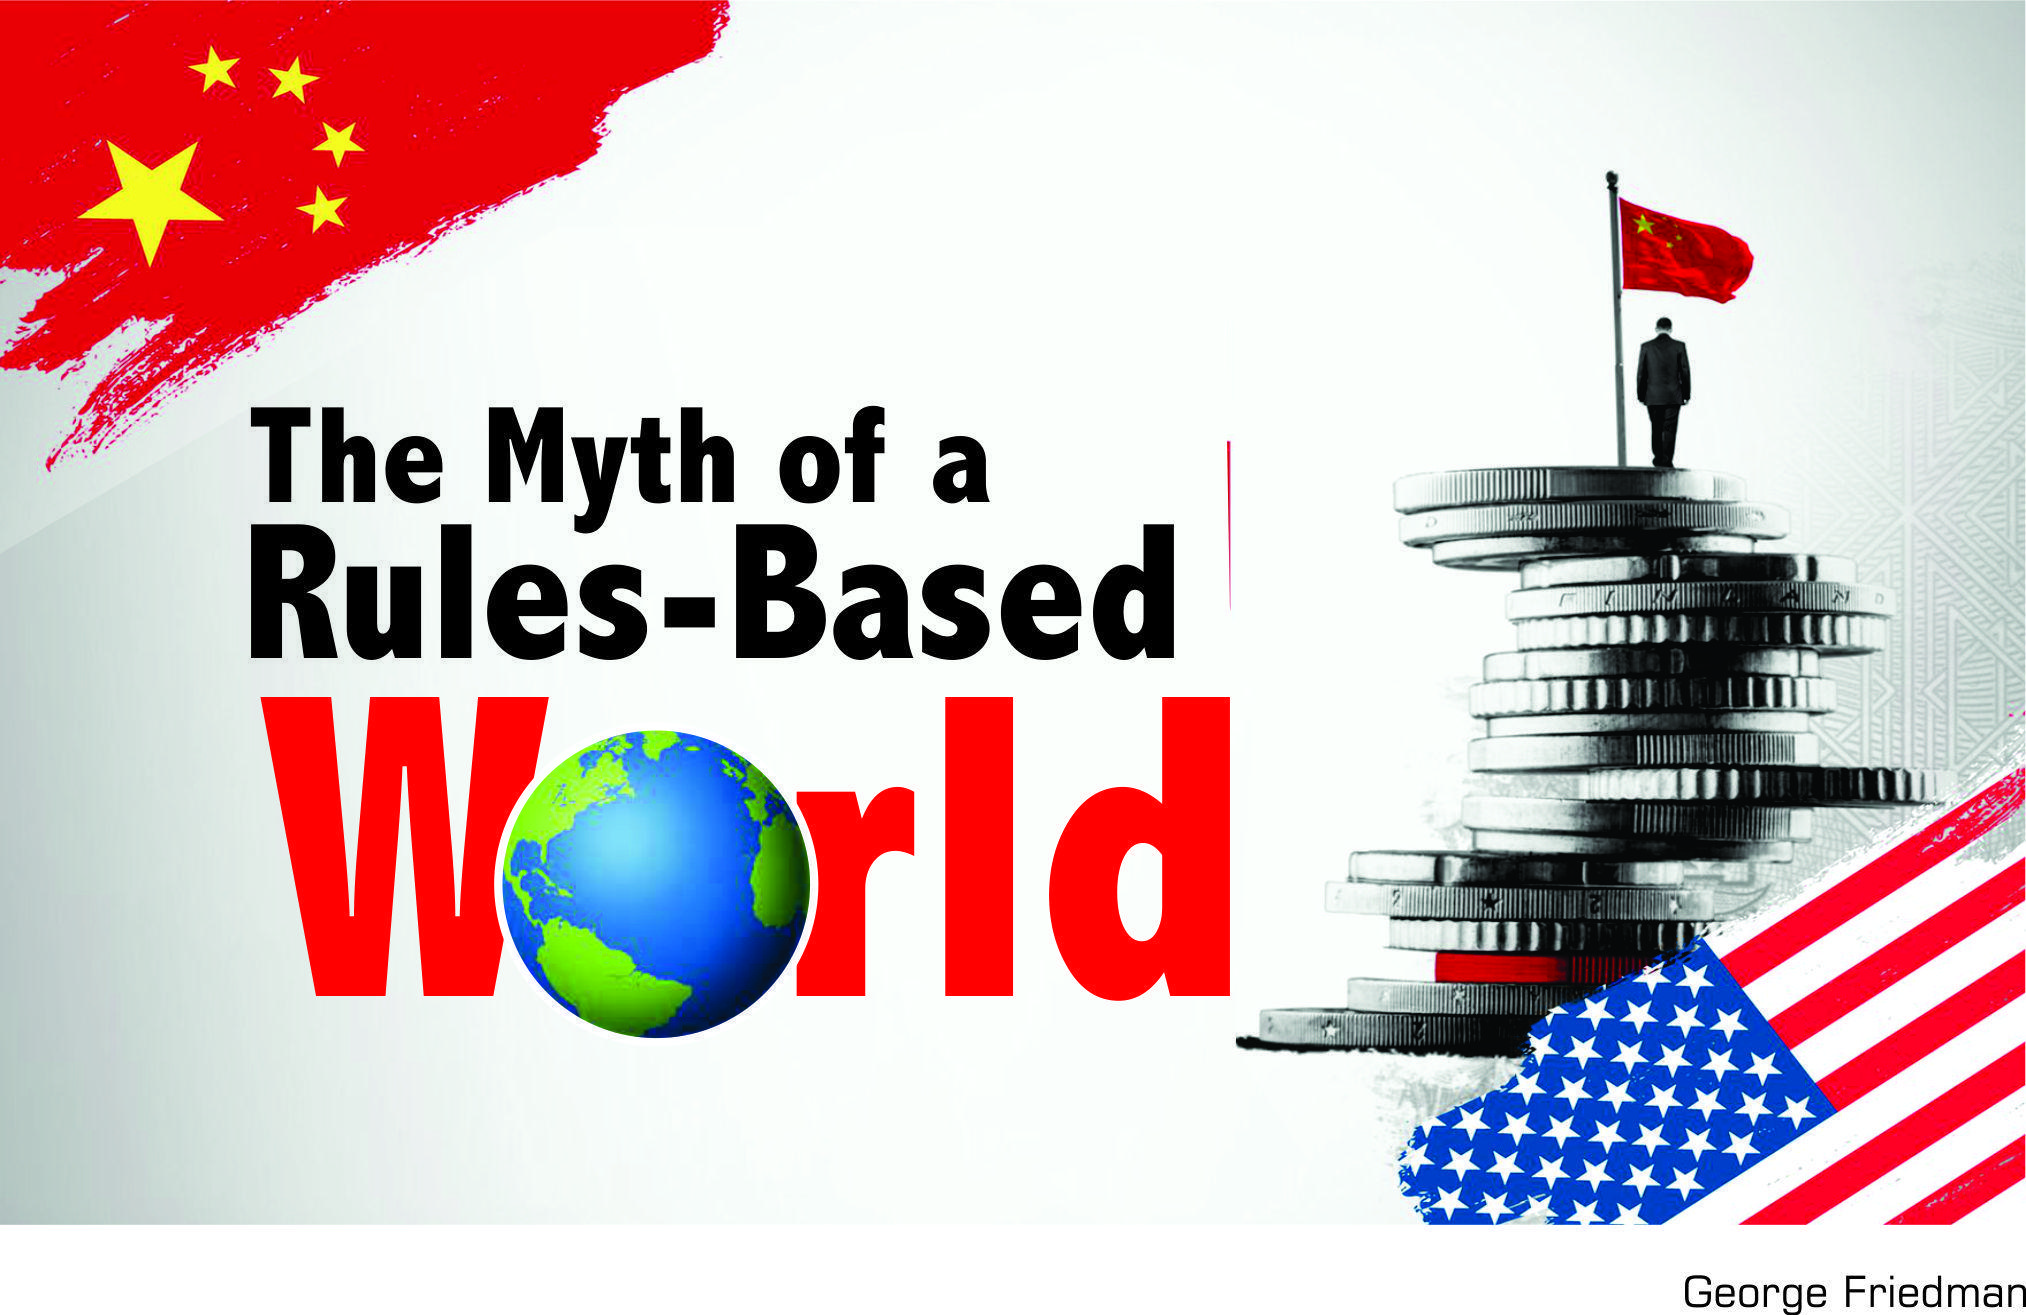 Read more about the article The Myth of a Rules-Based World